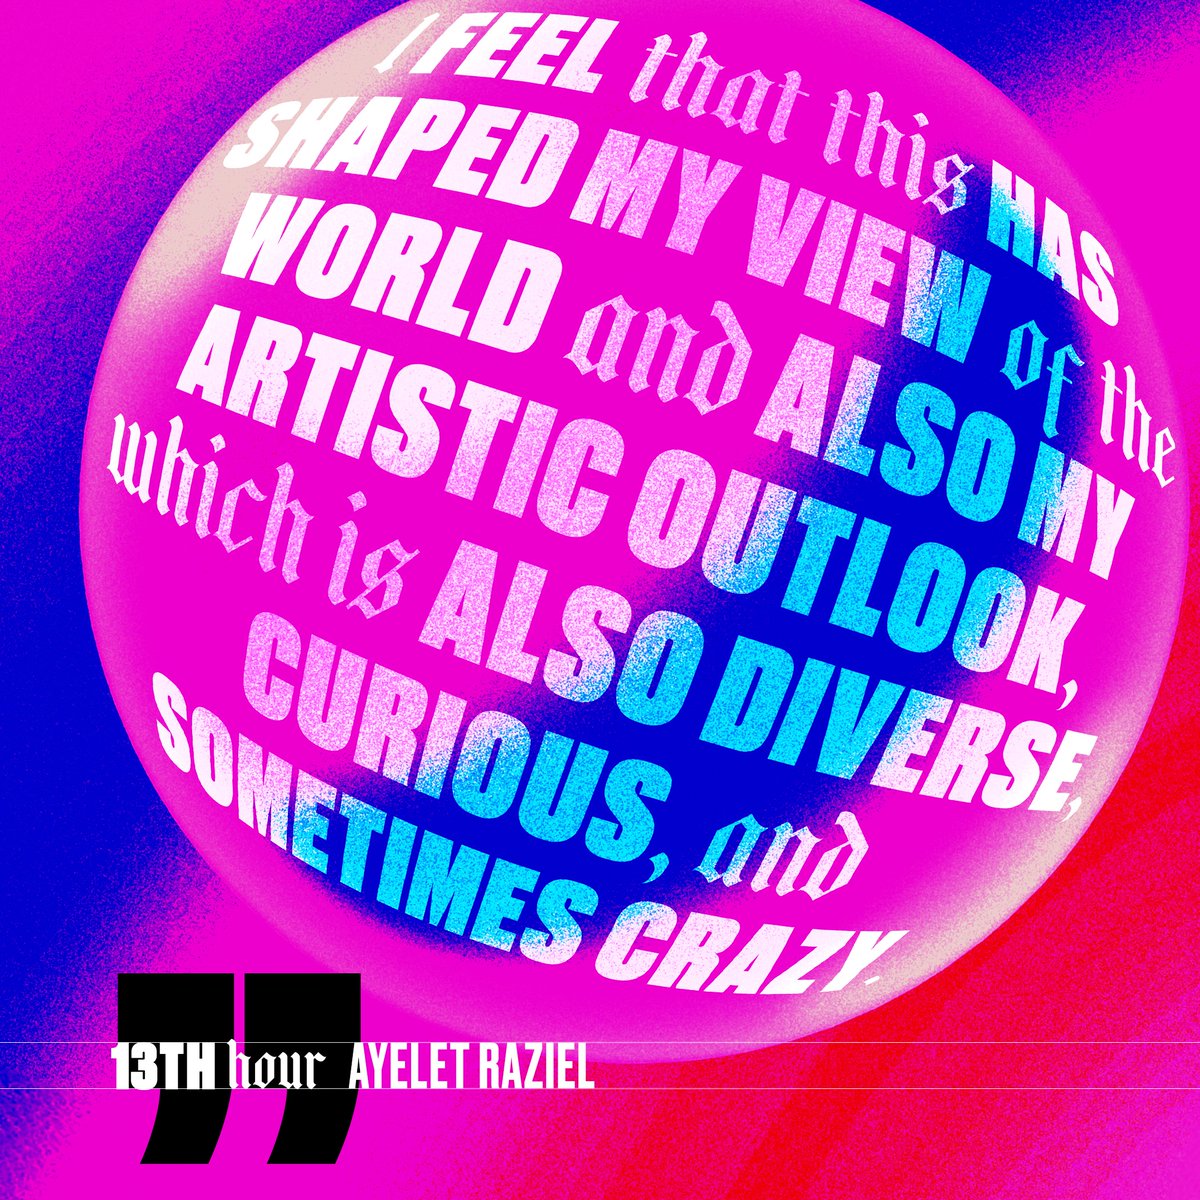 “I feel that this has shaped my view of the world and also my artistic outlook, which is also diverse, curious, and sometimes crazy.” Ayelet Raziel - The 13th hour